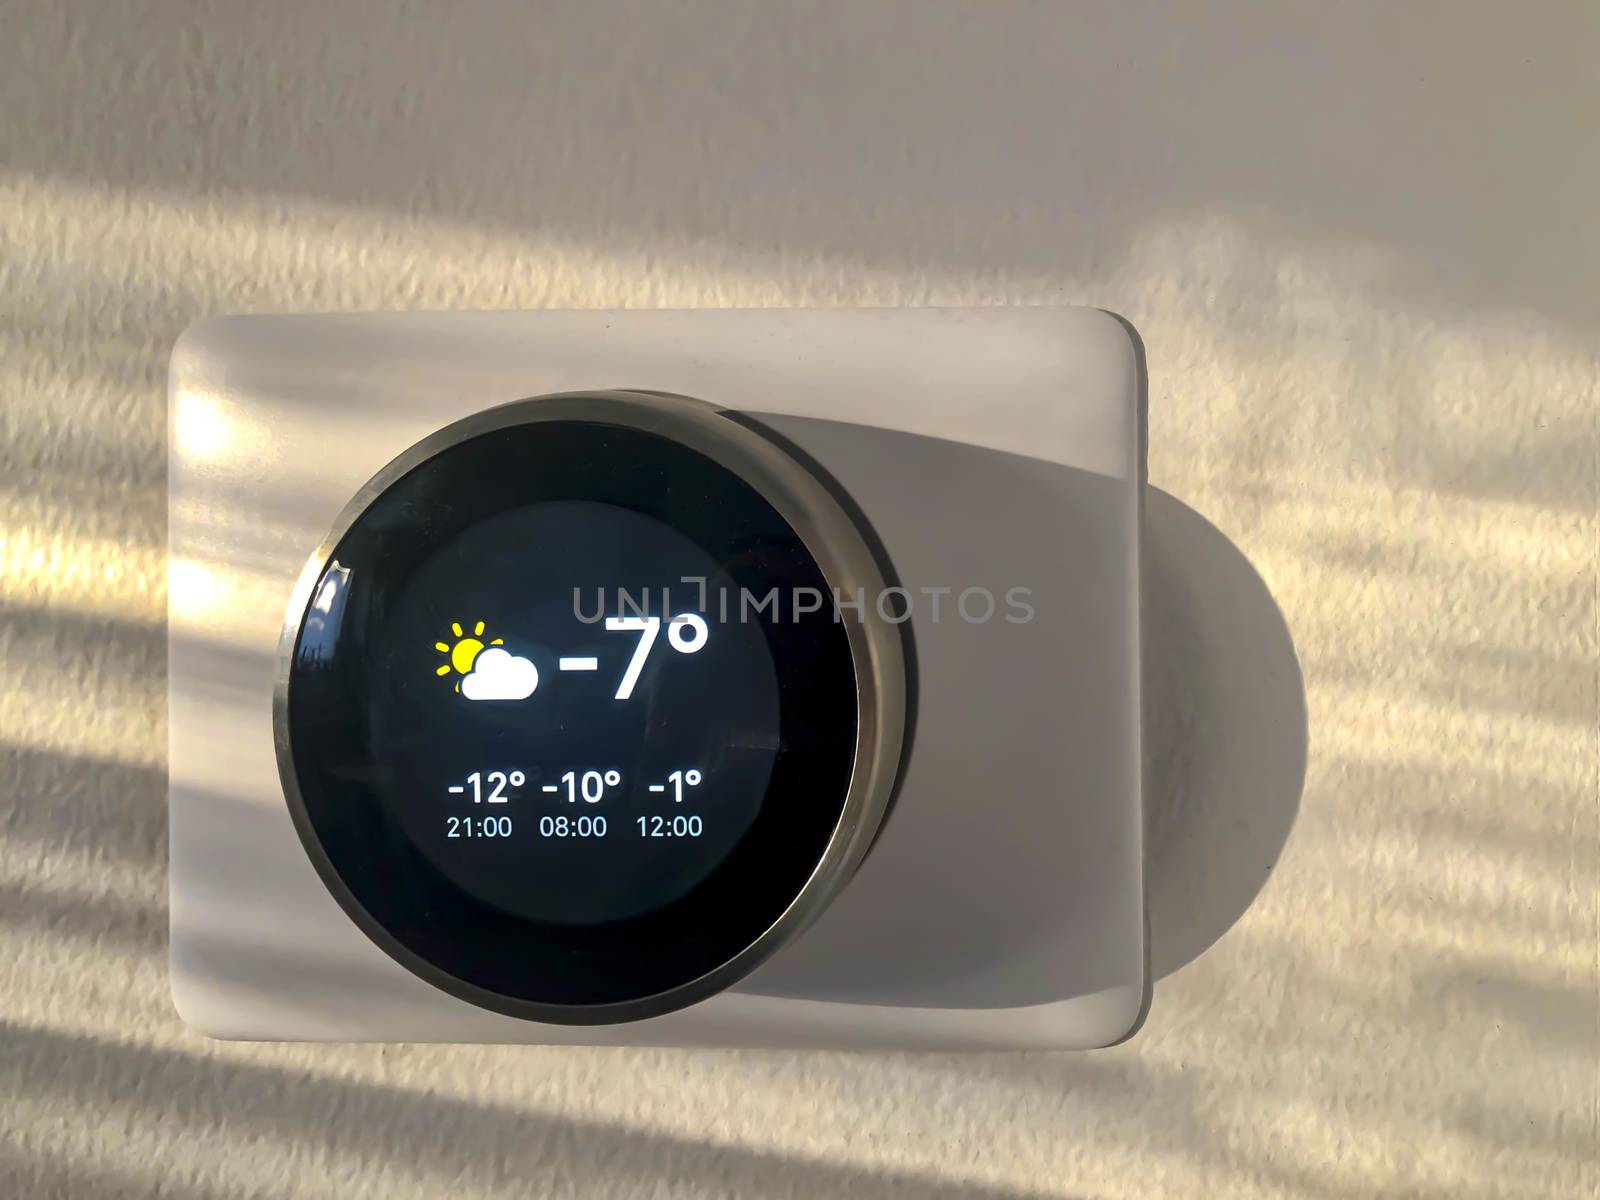 Smart Thermostat with the outside temperature during winter during the afternoon sunset